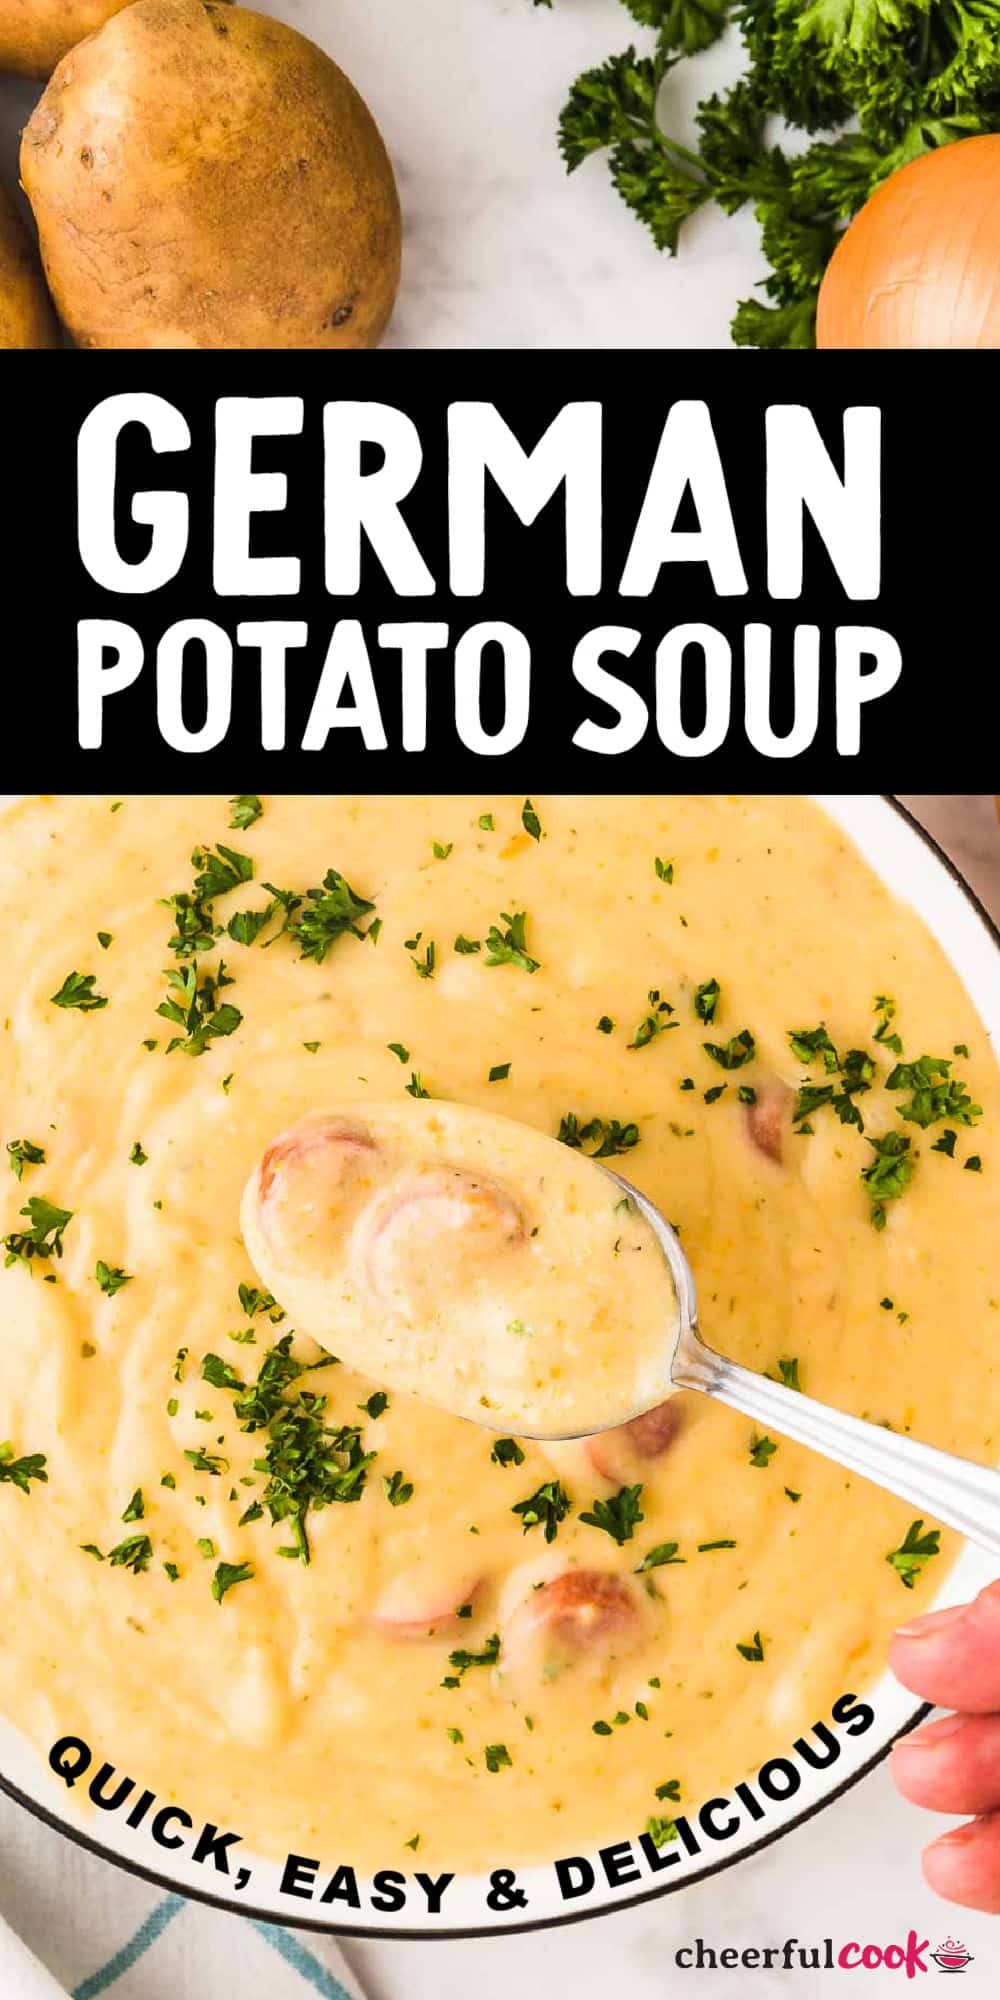 Try our traditional creamy German Potato Soup with Wiener sausages. Hearty, earthy flavors are combined in a rich, savory soup that's easy to make. Perfect anytime you're craving easy homemade comfort food. #cheerfulcook #germanpotatosoup #creamypotatosoup via @cheerfulcook